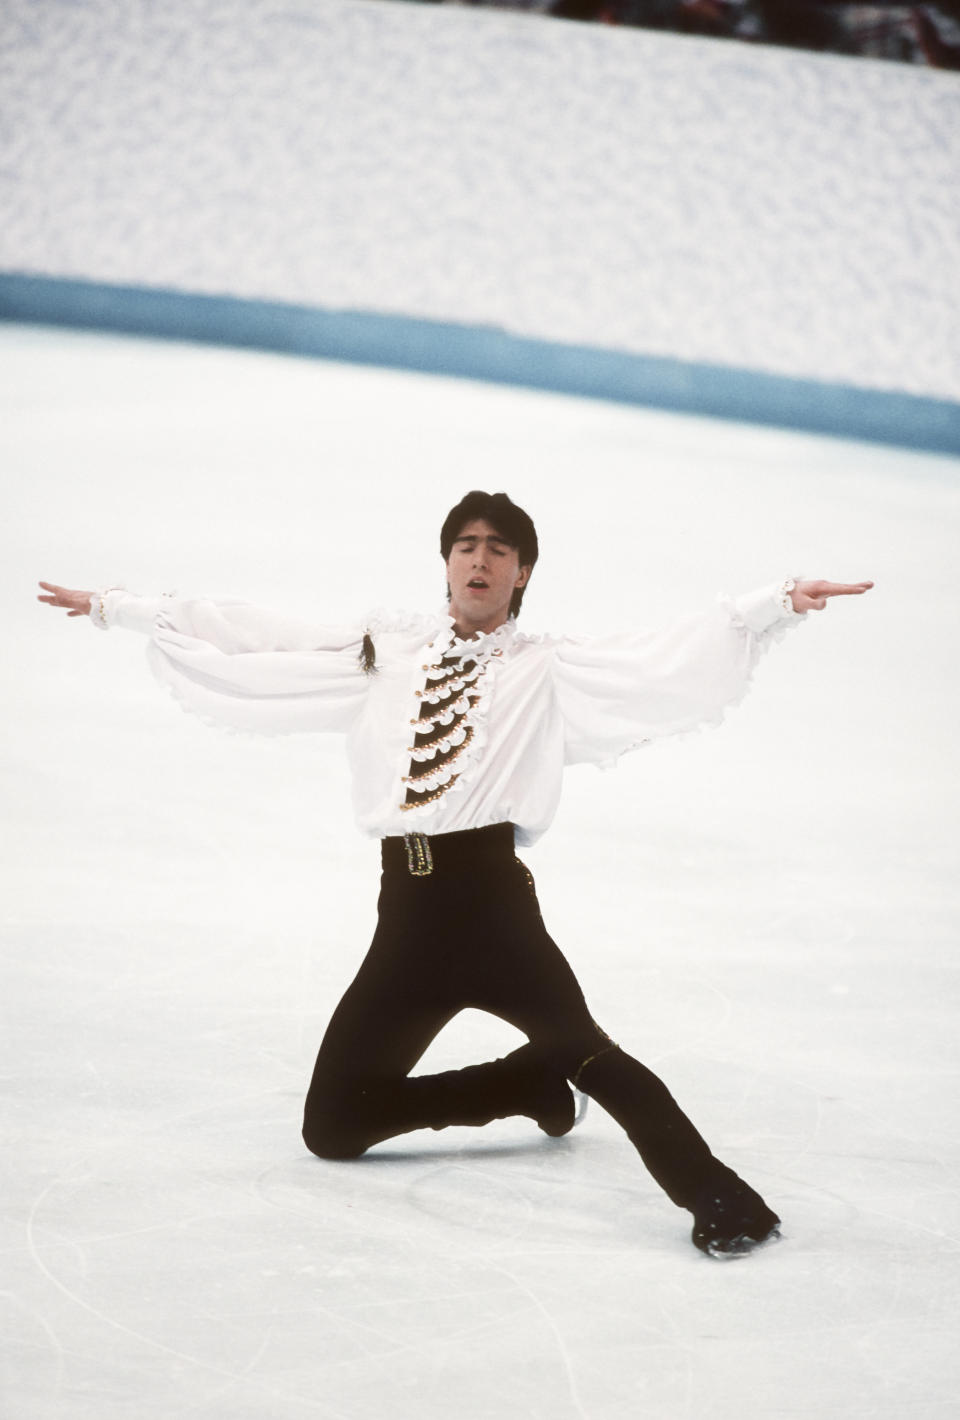 The Russian champion in the free skate portion of the men's figure skating singles competition&nbsp;at the 1994 Winter Olympics in Lillehammer, Norway.